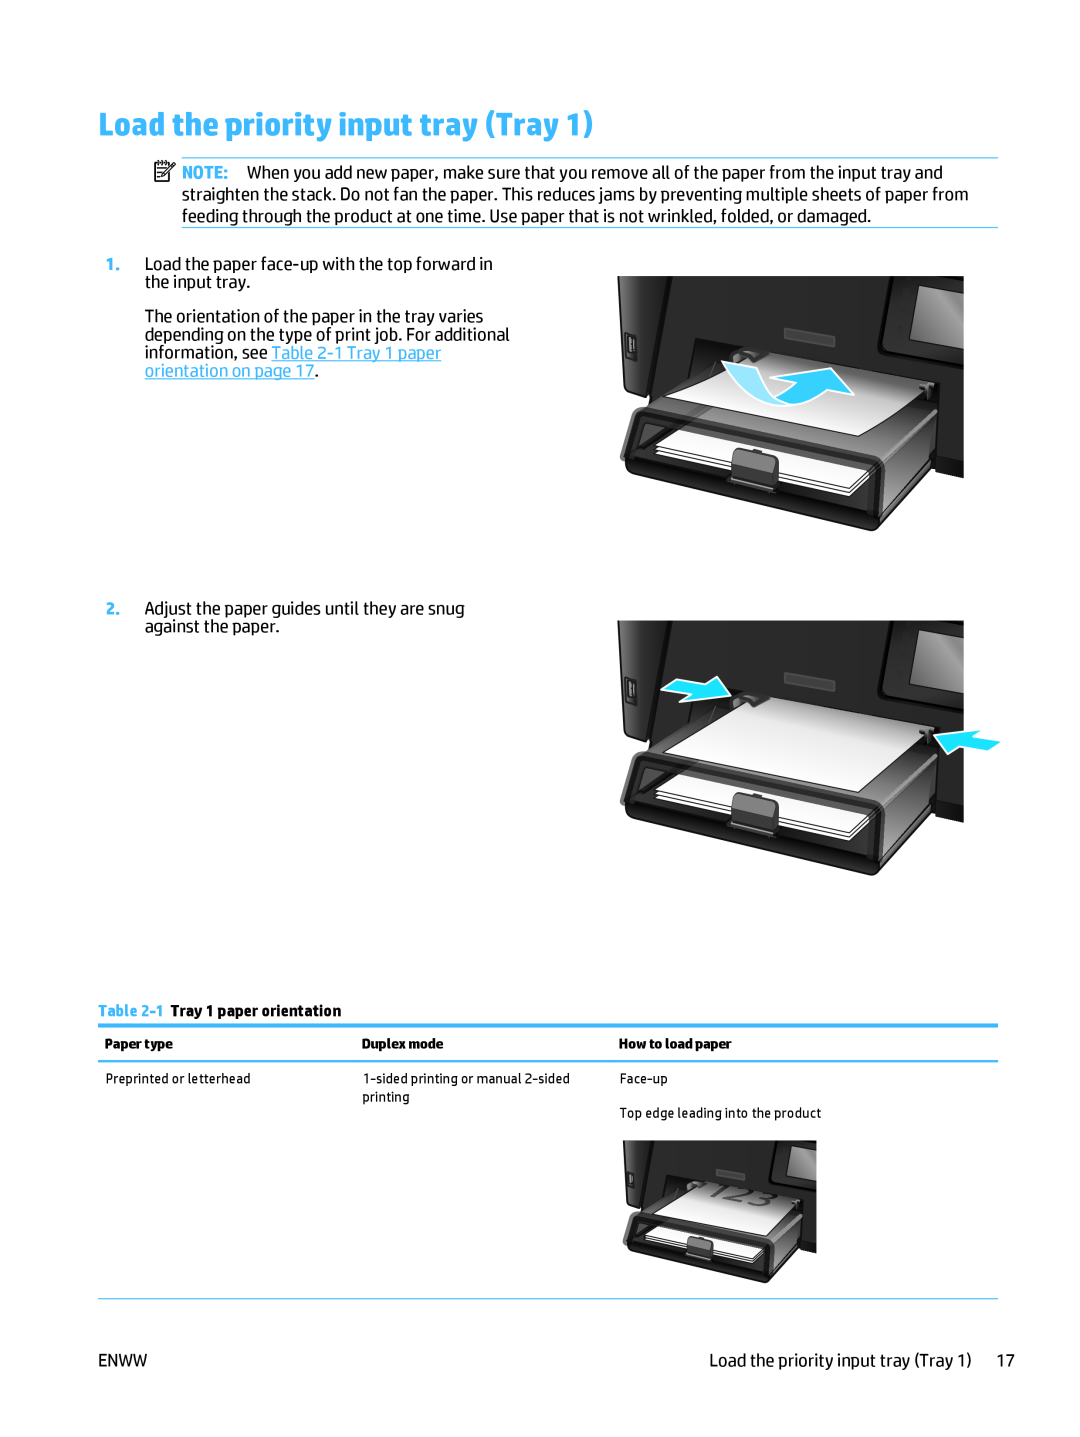 HP MFP M225dw, MFP M225dn manual Load the priority input tray Tray, 1 Tray 1 paper orientation 